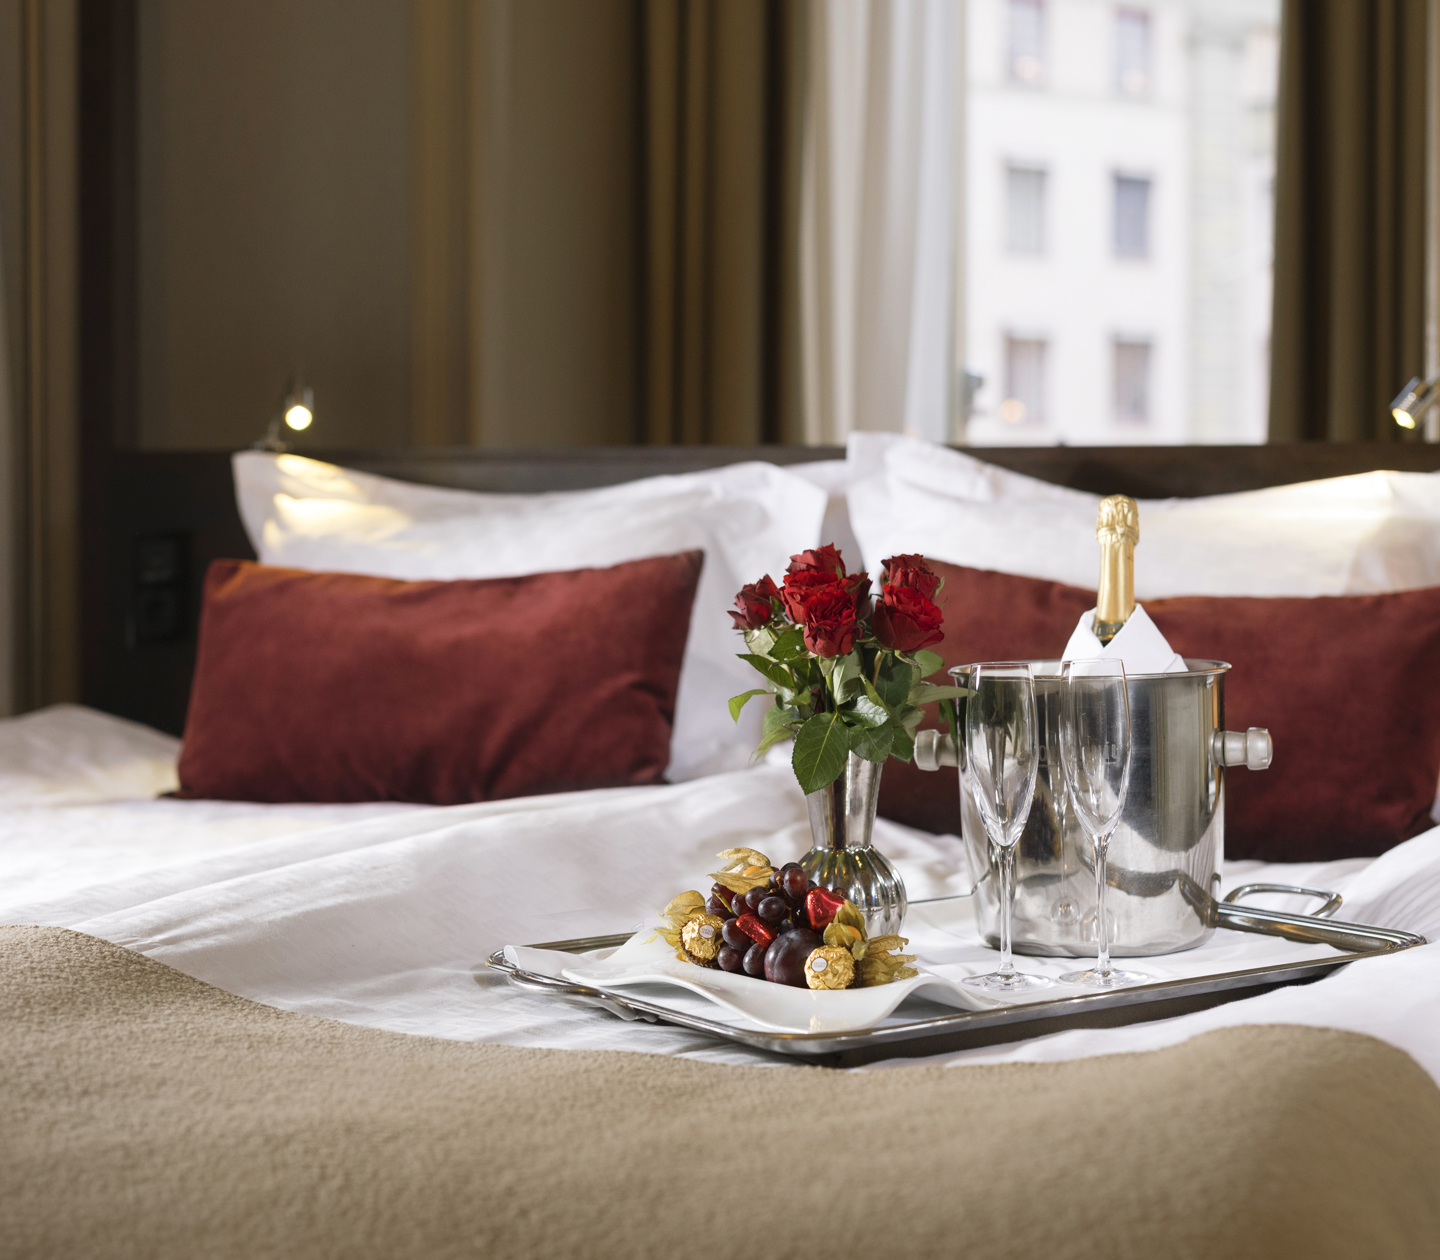 Champagne, flowers, chocolate & fruit on a hotel bed